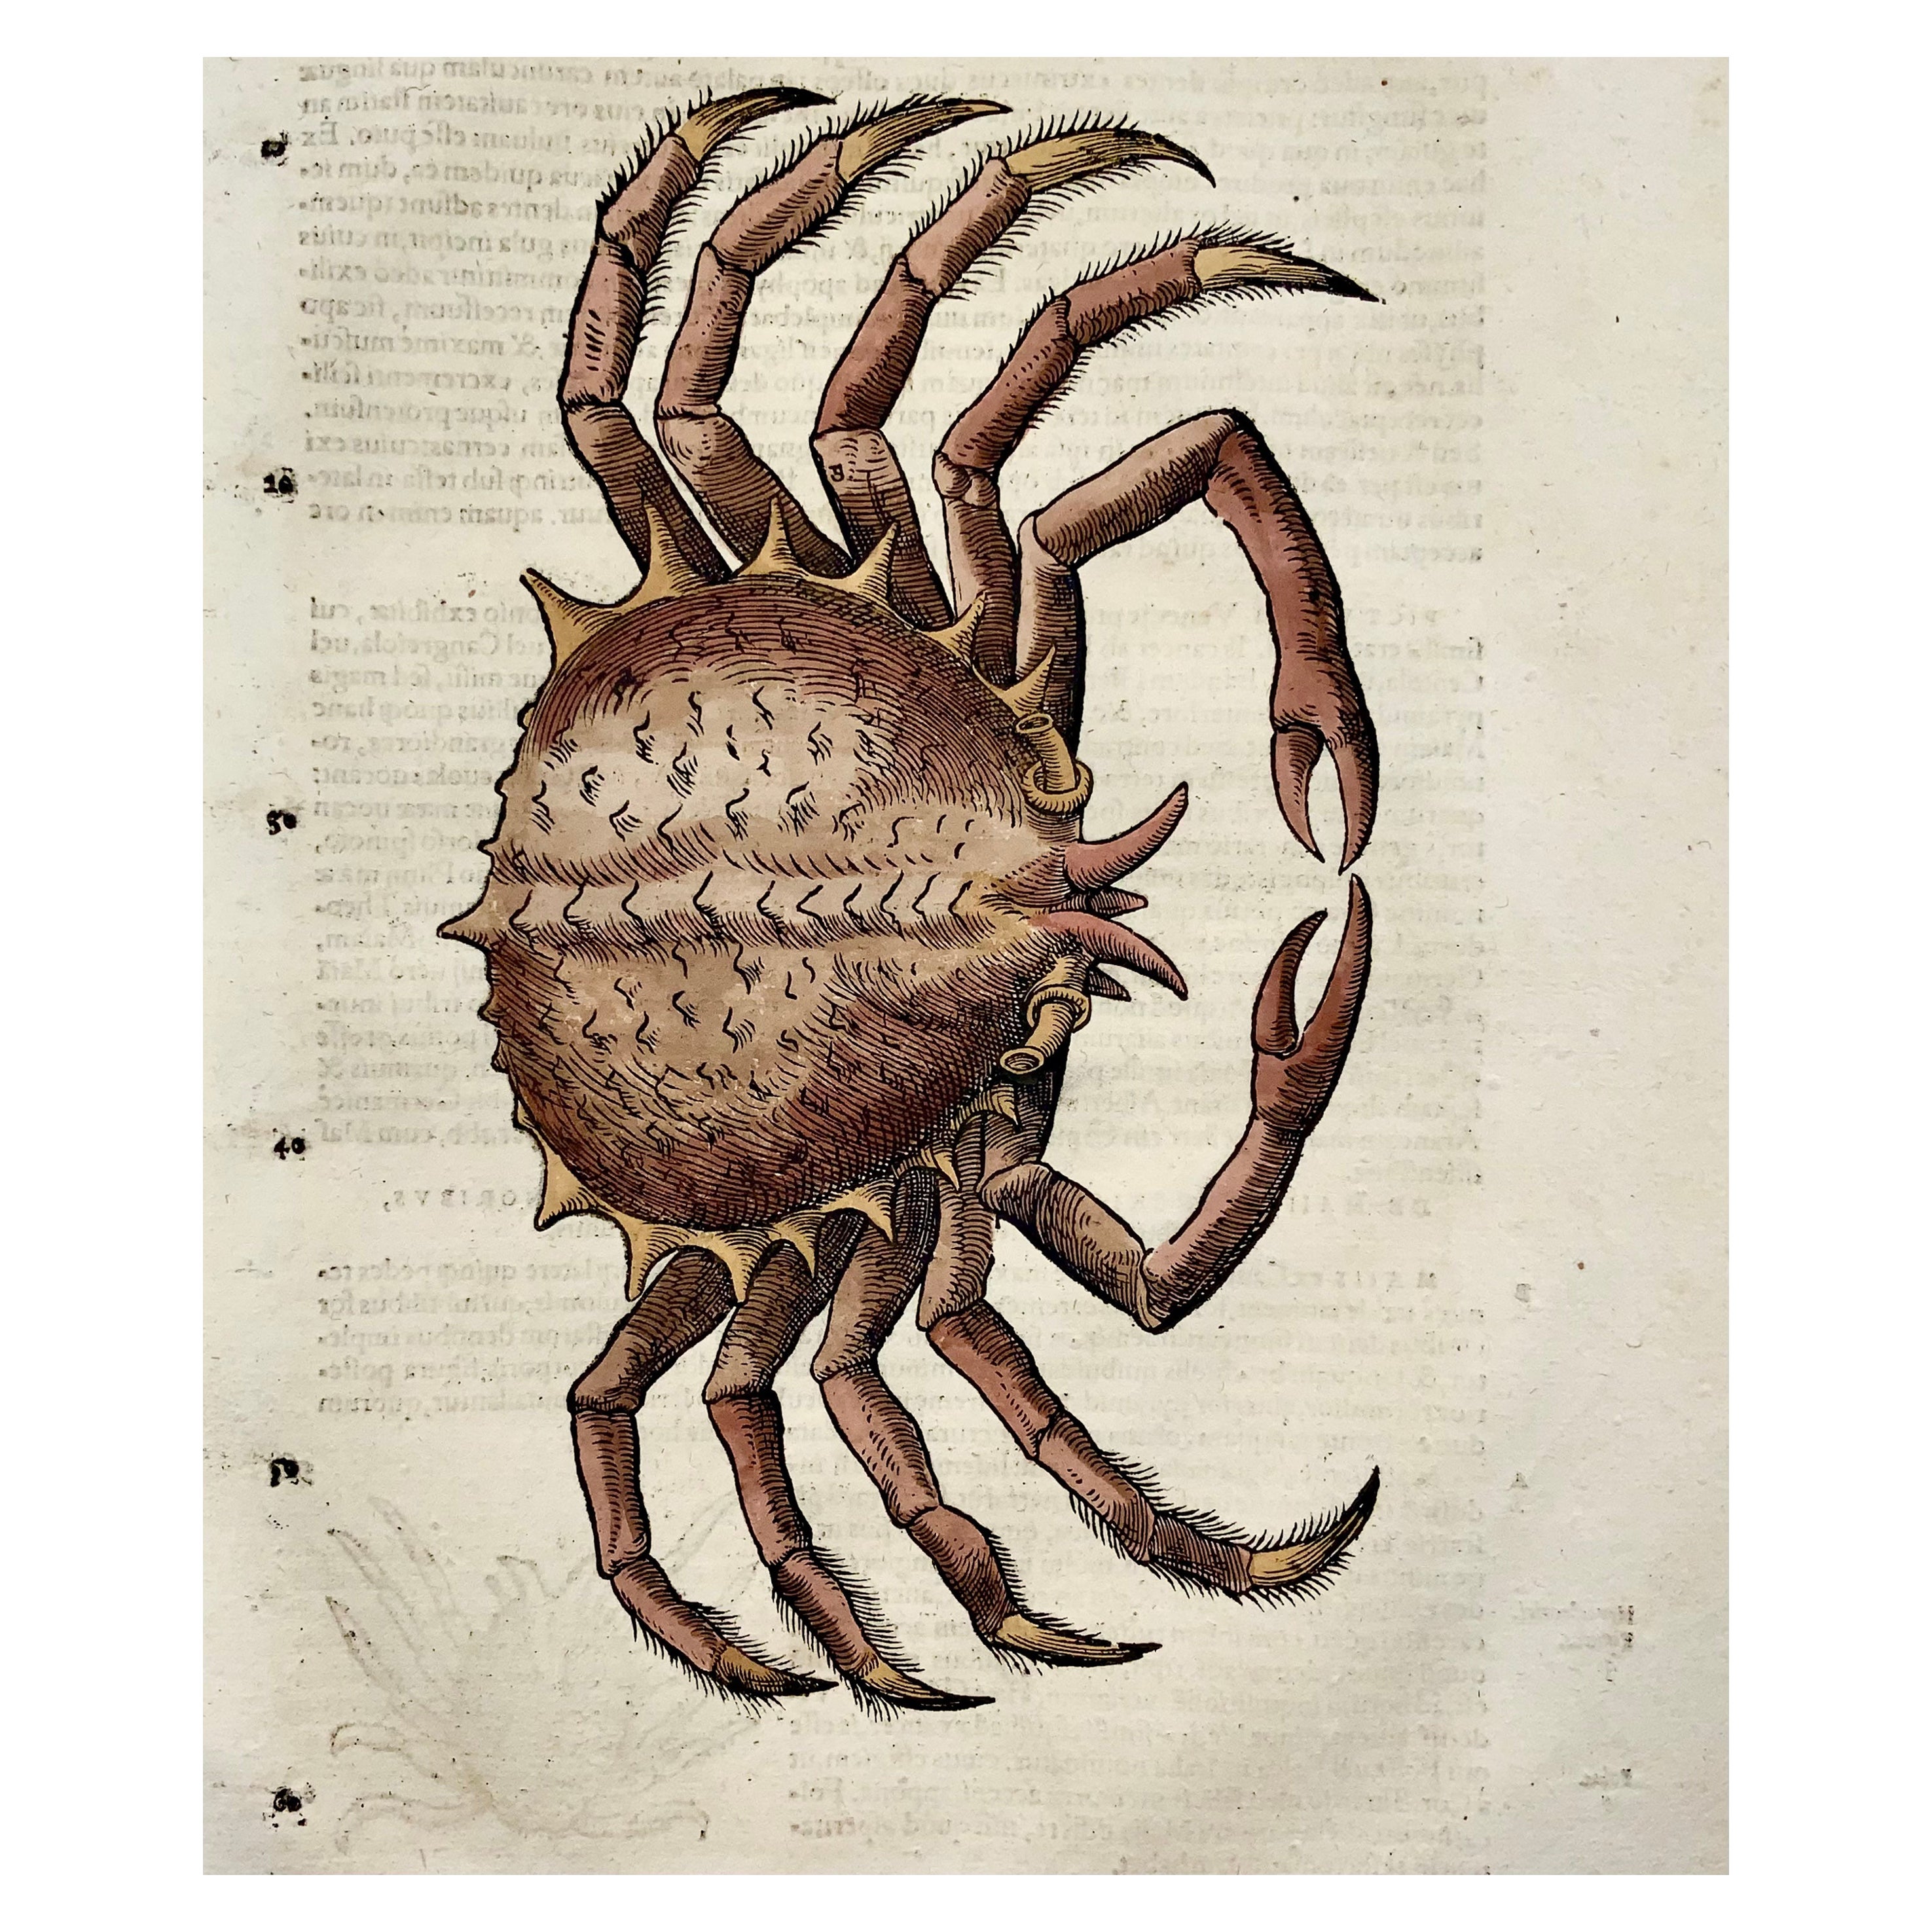 1558 Spider Crab, Conrad Gesner, Folio, Woodcut, Hand Coloured, First State